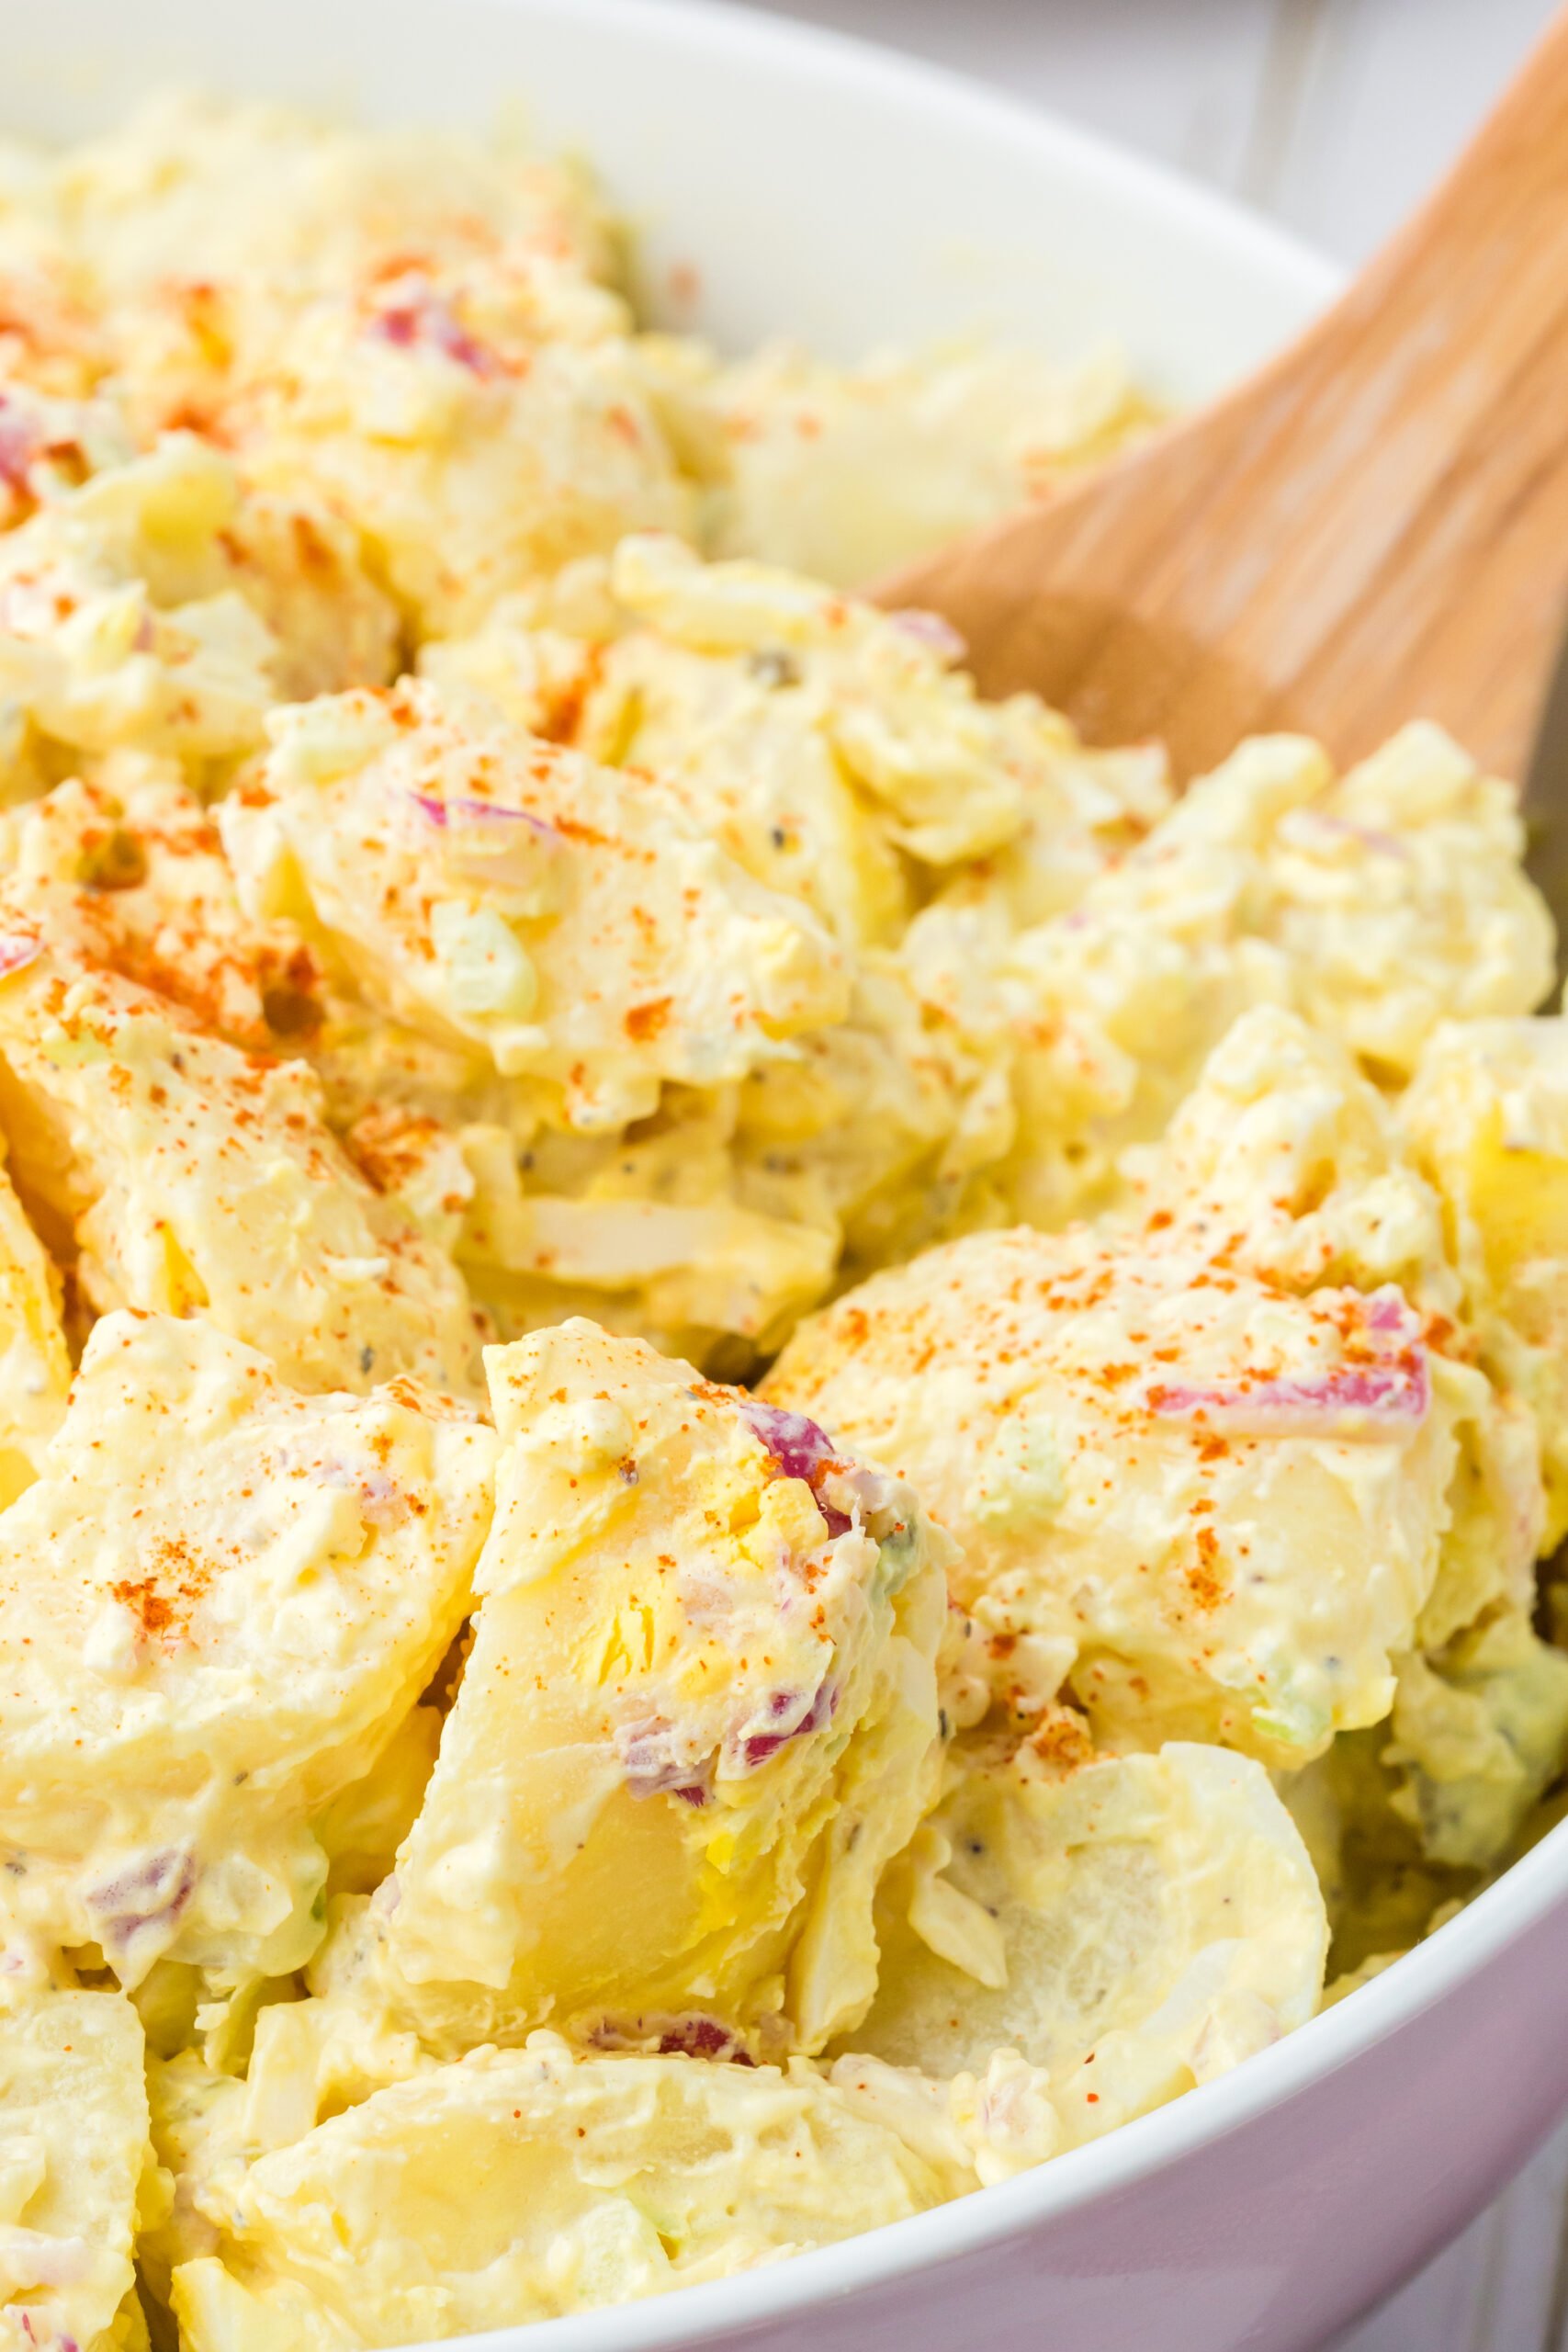 up close angled down view of a bowl of potato salad with a spoon, topped with paprika garnish